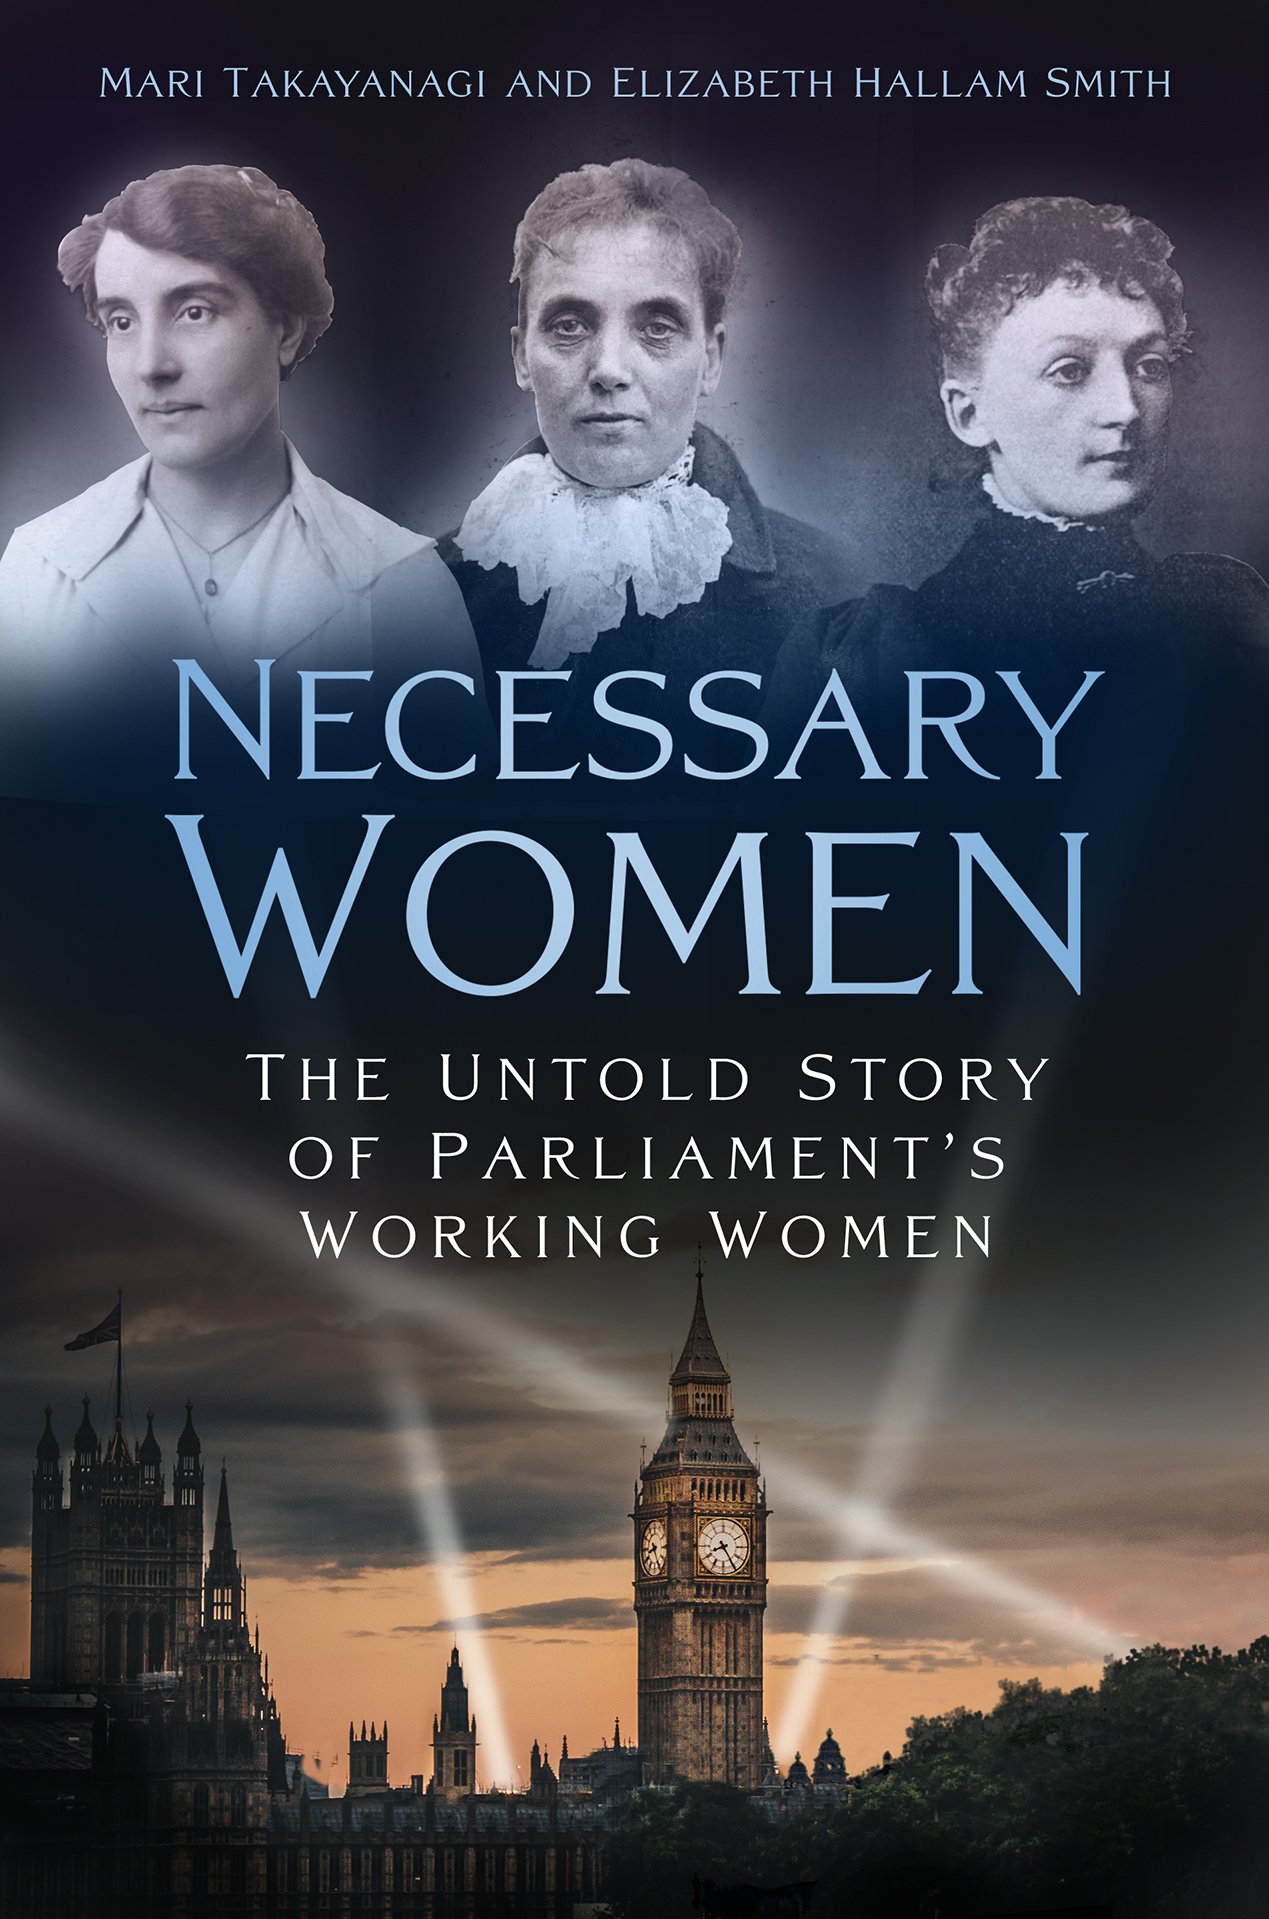 Front cover of Necessary Women, showing Big Ben with search lights in the sky, and three black and white photographs of women staff